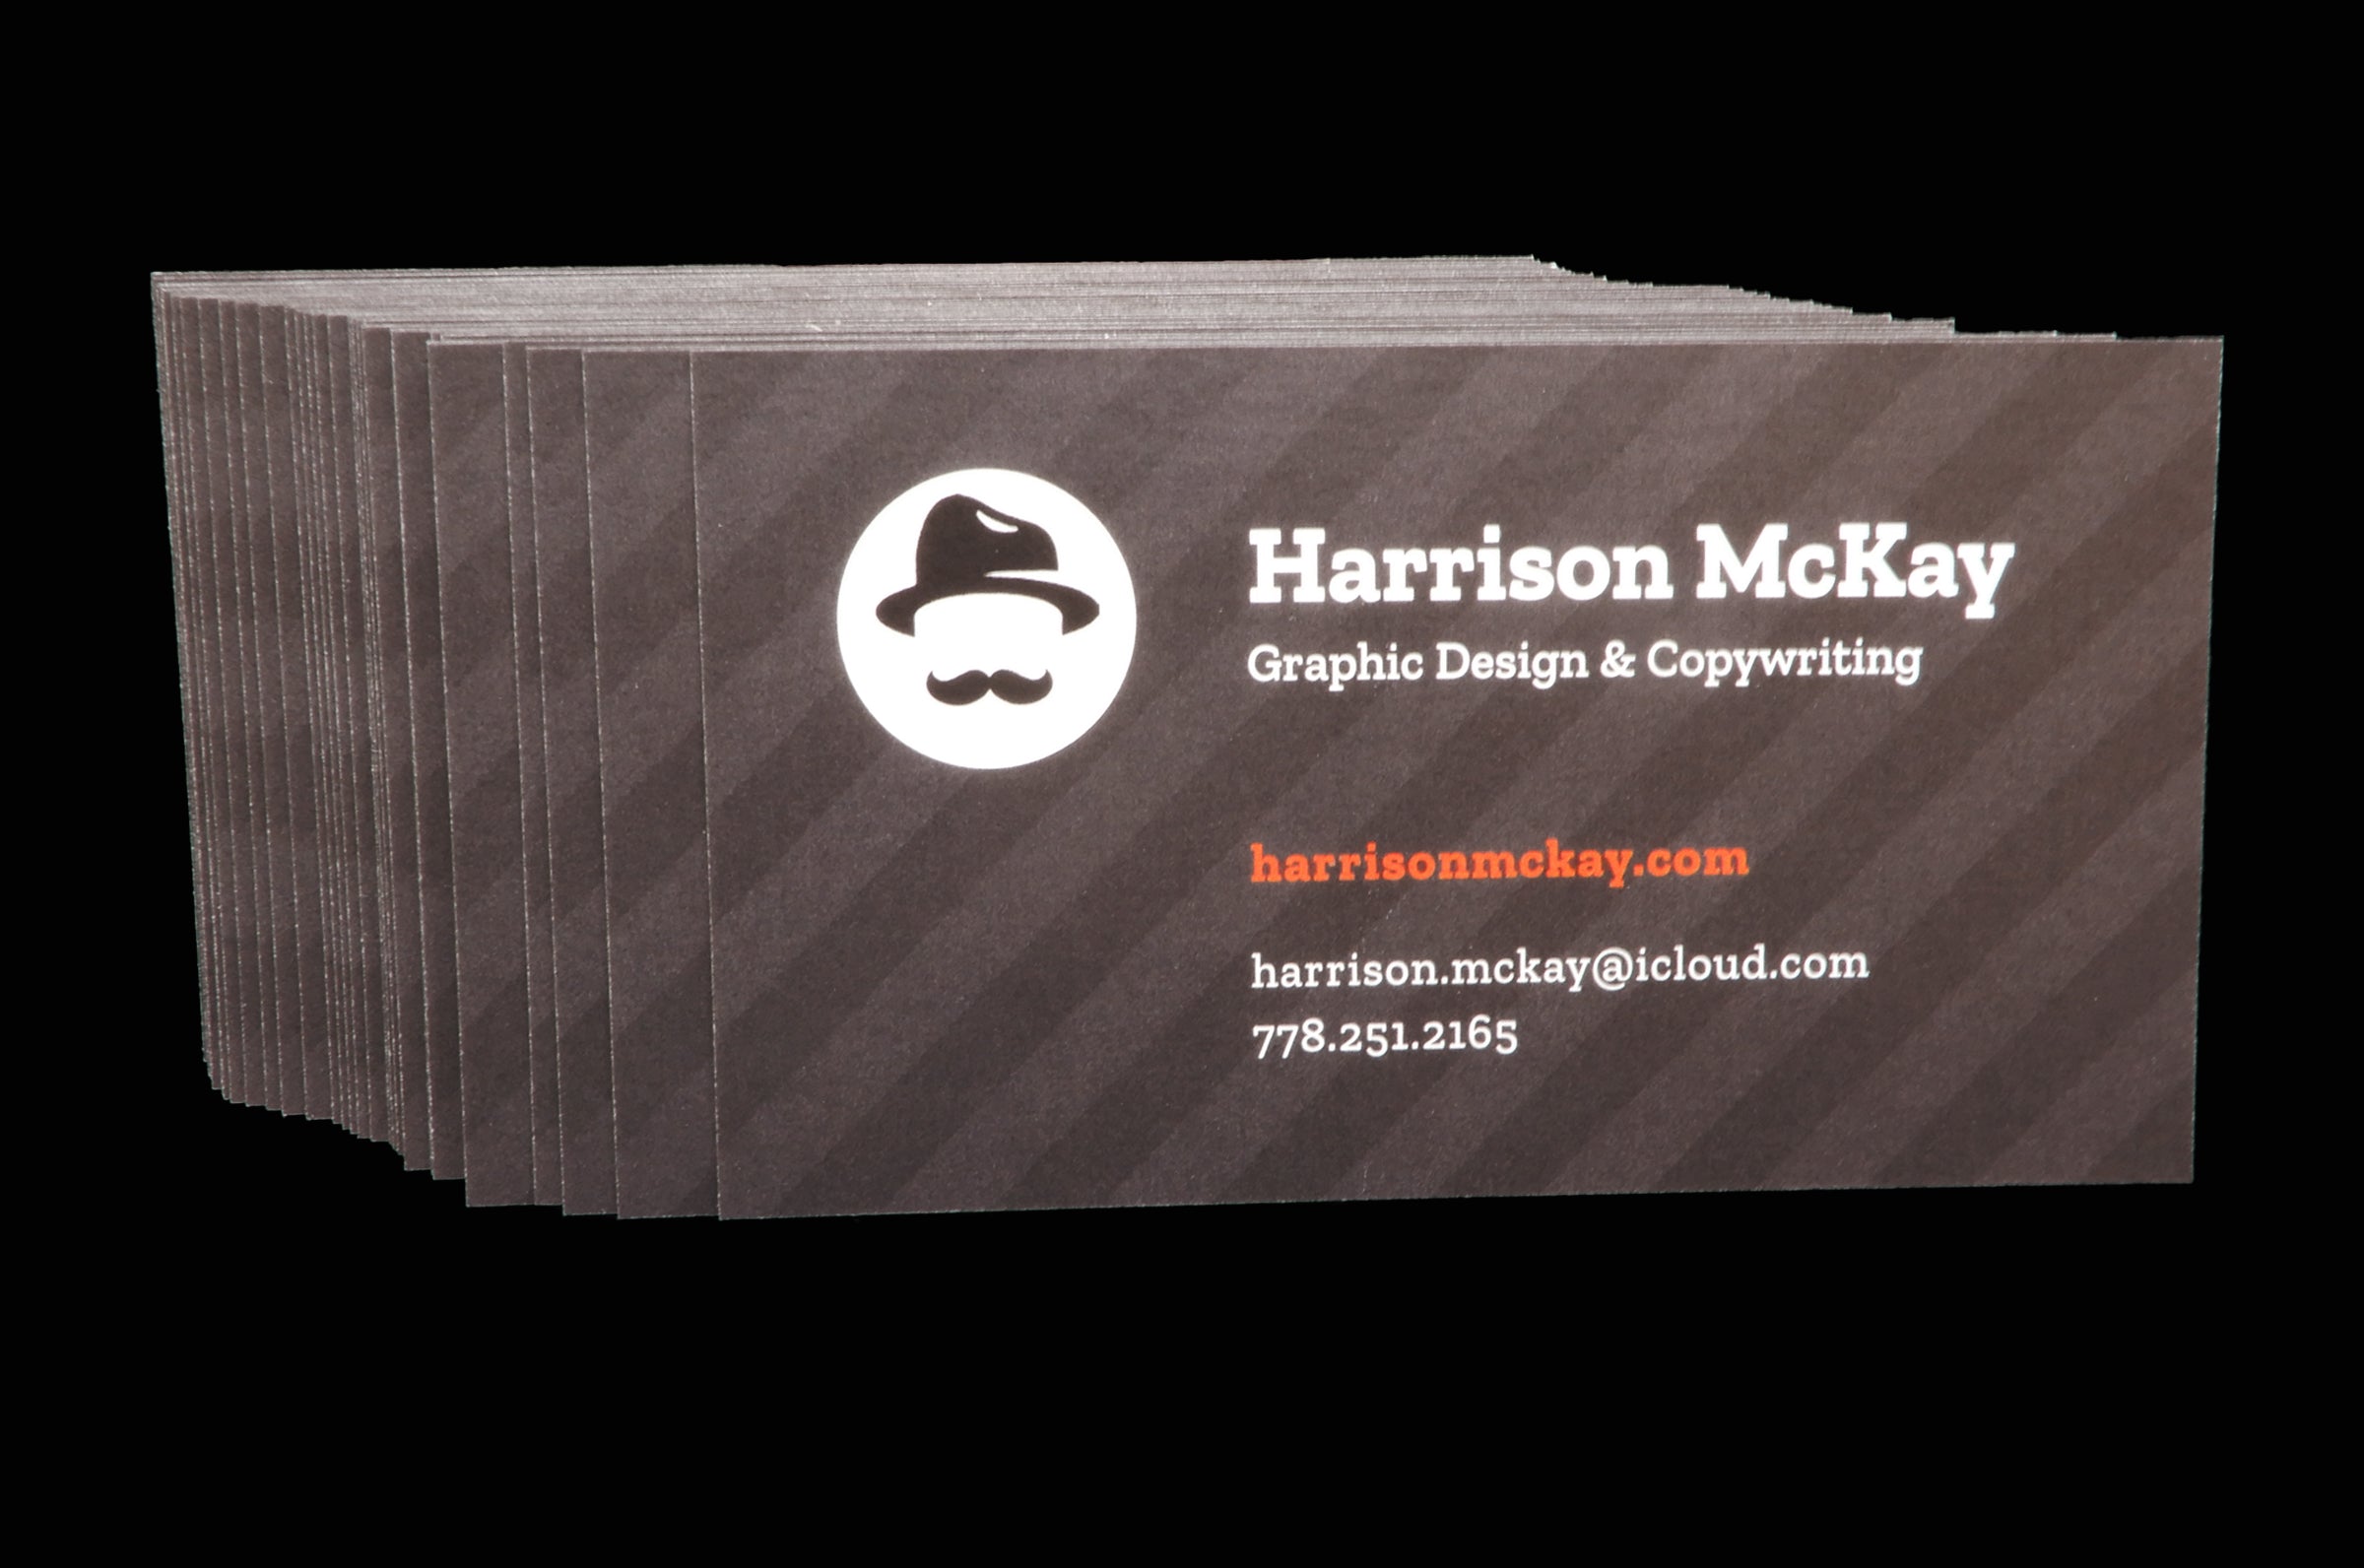 Custom business cards for Harrison Mckay on silk laminated 19pt stock | Clubcard Printing USA